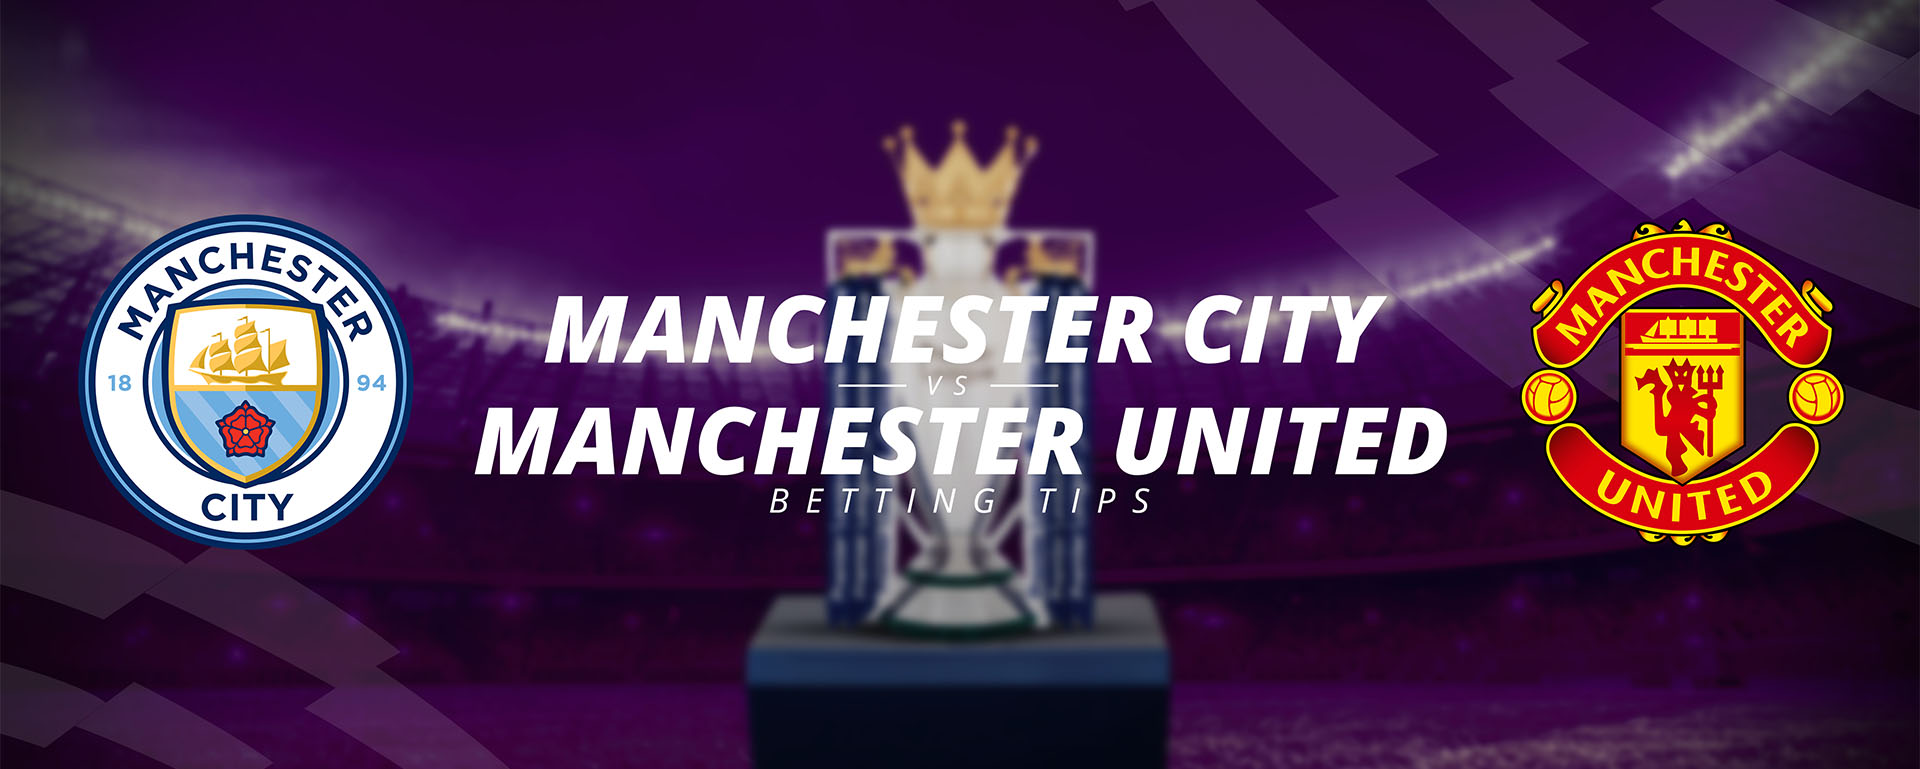 MANCHESTER CITY VS MANCHESTER UNITED: PREVIEW